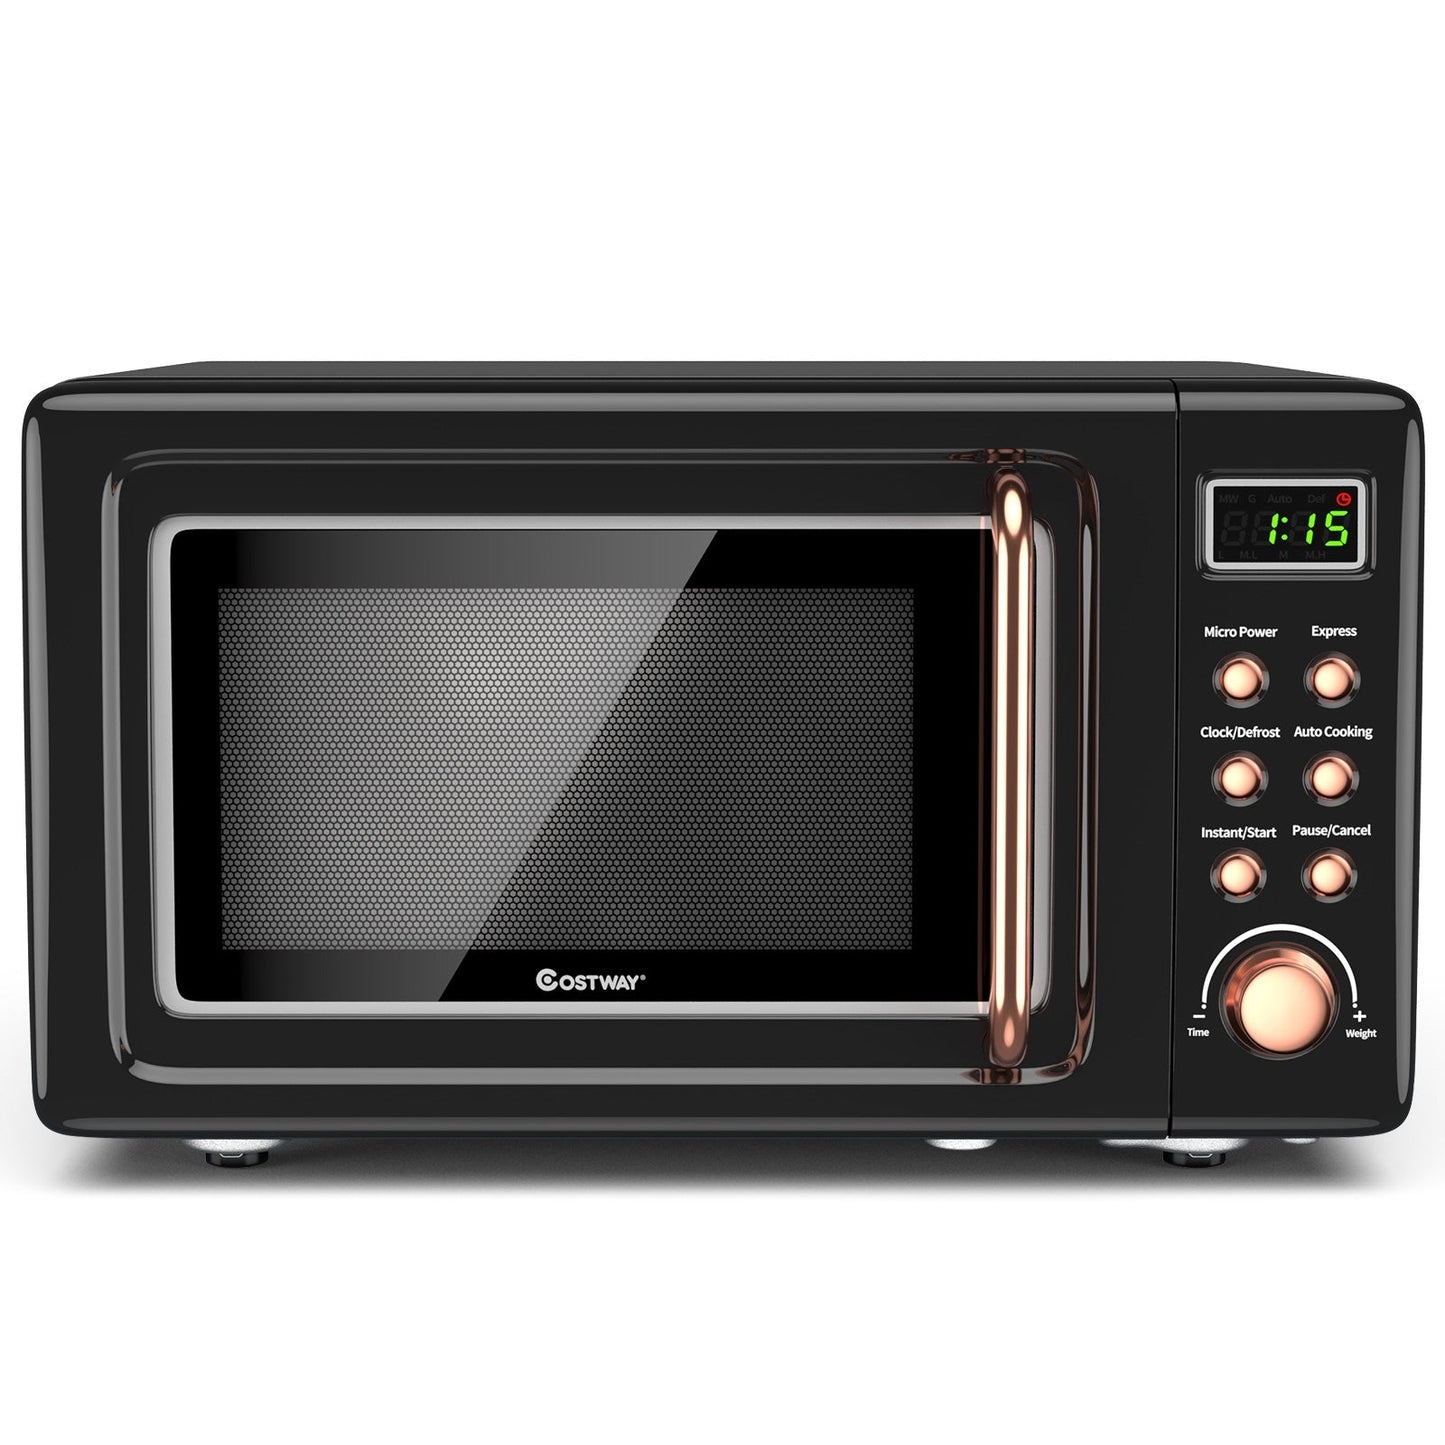 700W Retro Countertop Microwave Oven with 5 Micro Power and Auto Cooking Function - Gallery Canada